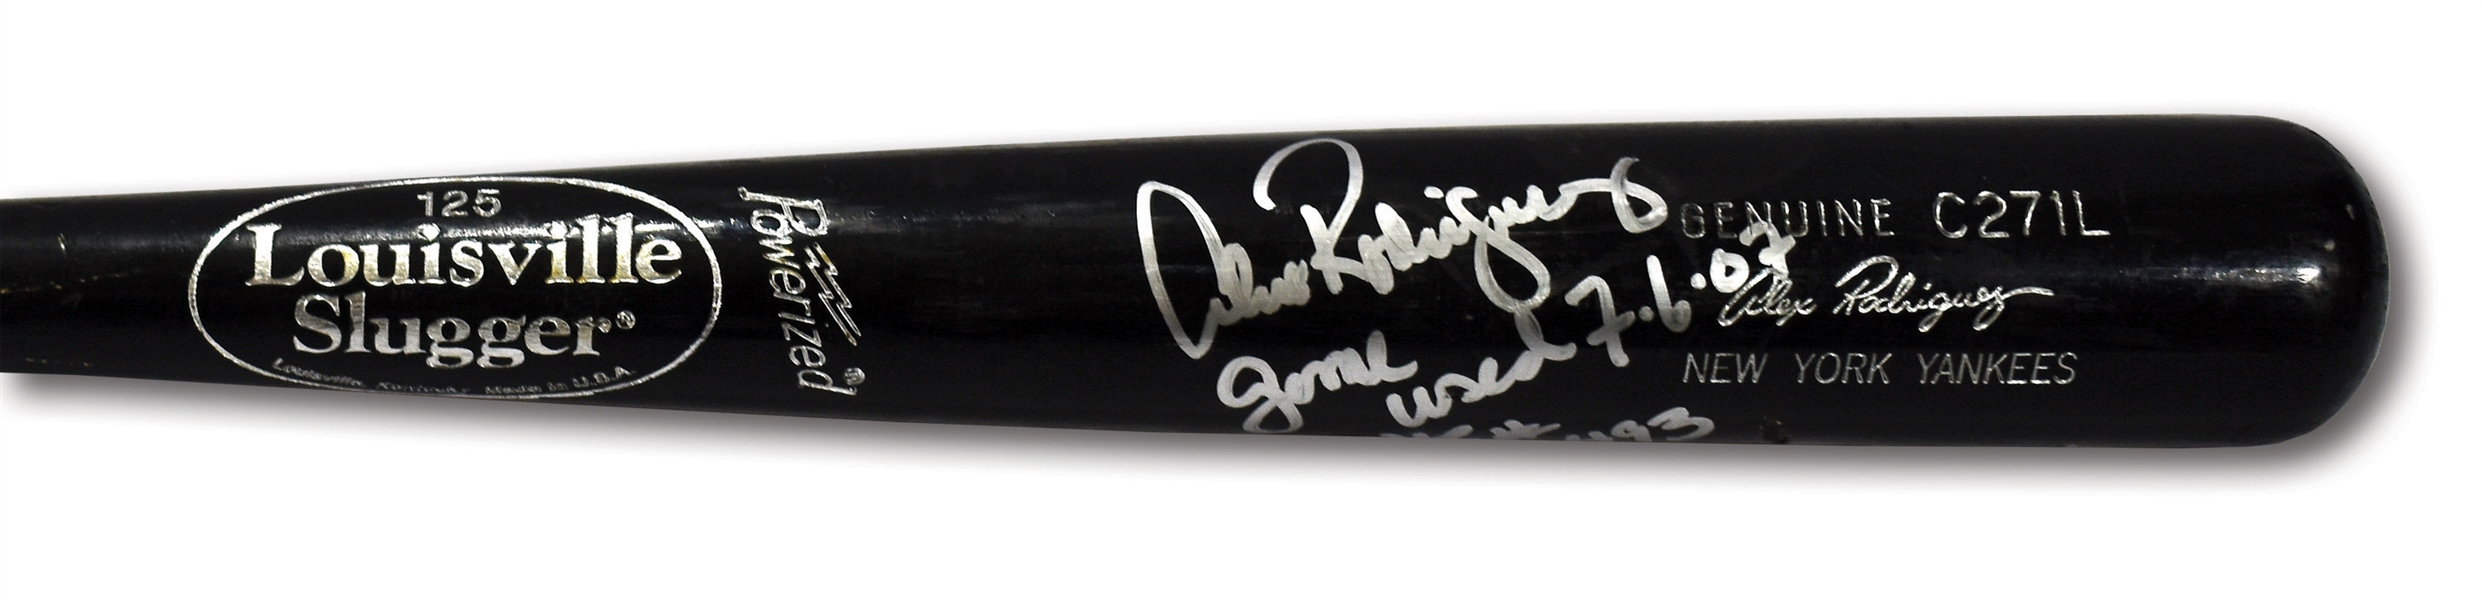 2007 ALEX RODRIGUEZ SIGNED & INSCRIBED LOUISVILLE SLUGGER PRO MODEL BAT USED TO HIT HOME RUN #493 TYING LOU GEHRIG! (PSA/DNA GU 9.5, A-ROD LOA)